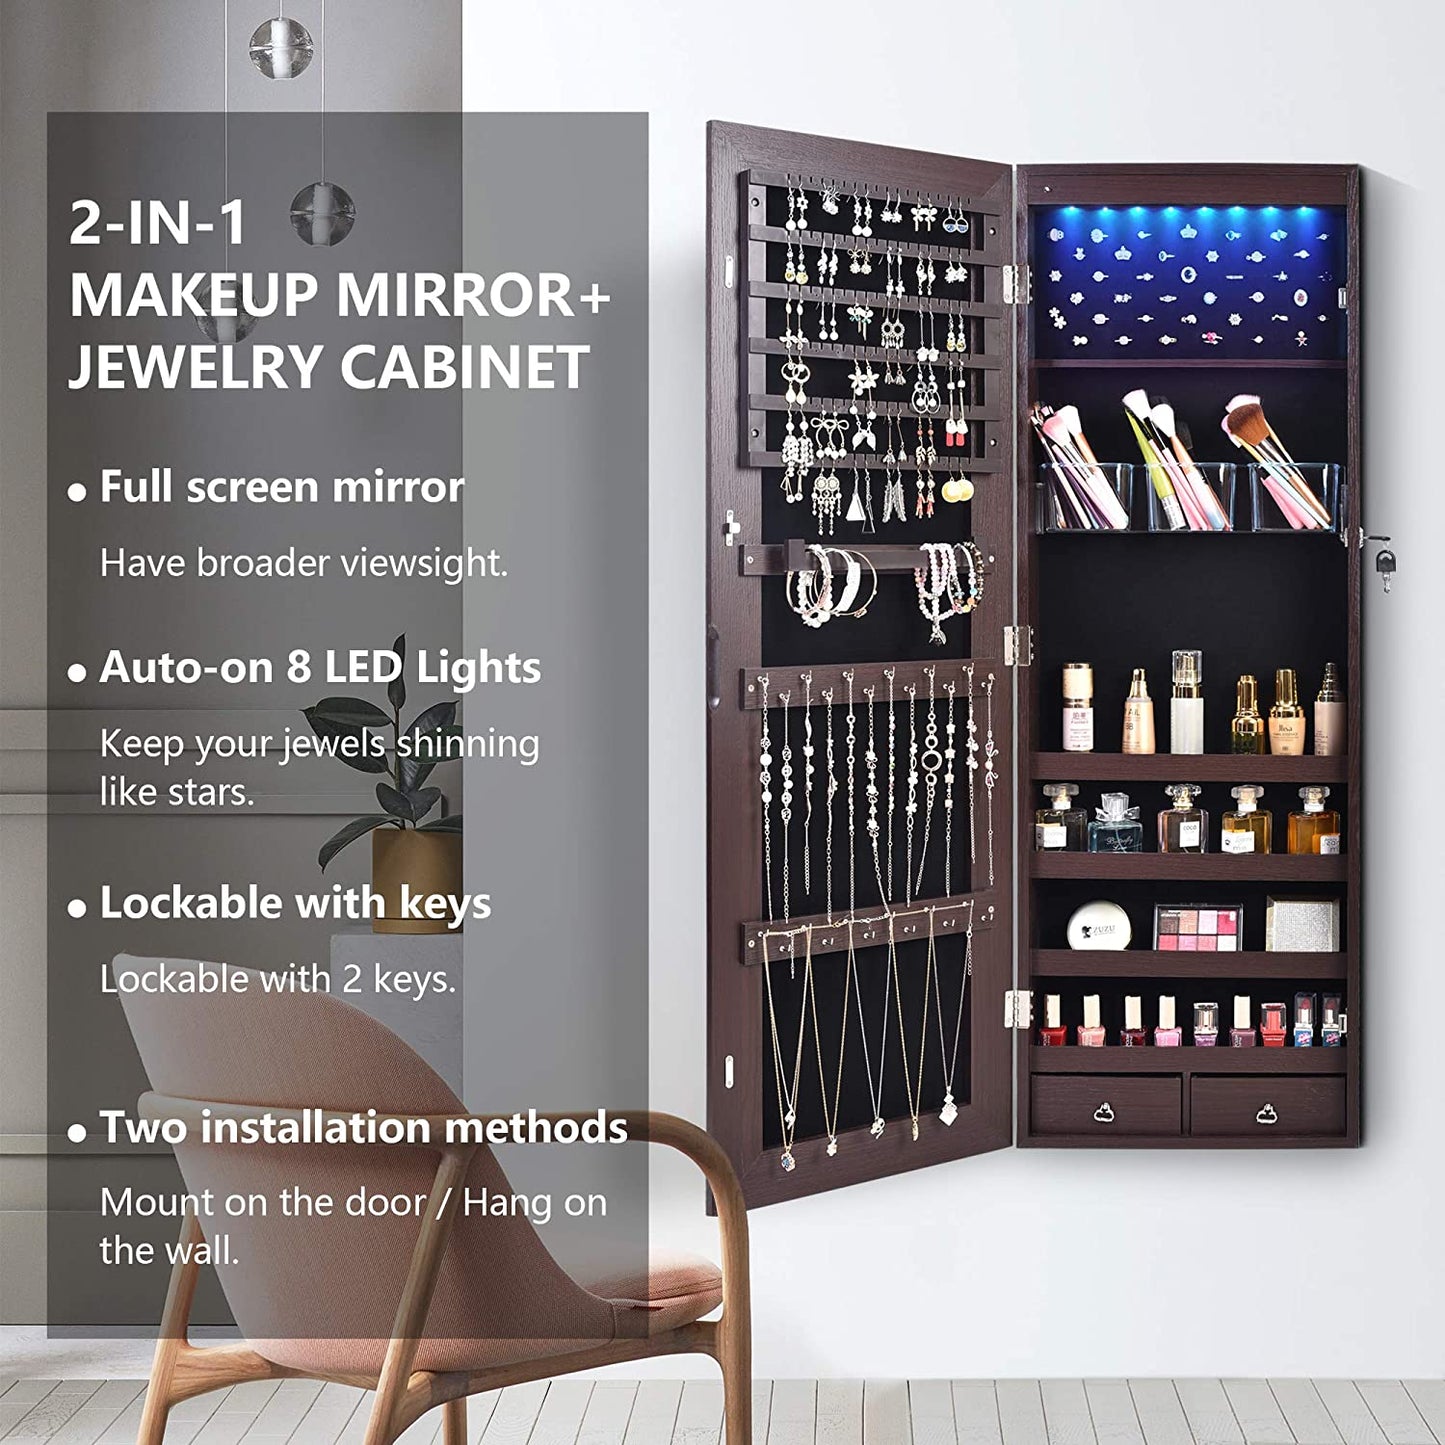 Full-Length HD Silver Glass Makeup Mirror + Jewelry Cabinet Lockable With 8 Auto-On LED Lights Wall Mounted / Over The Door - Brown